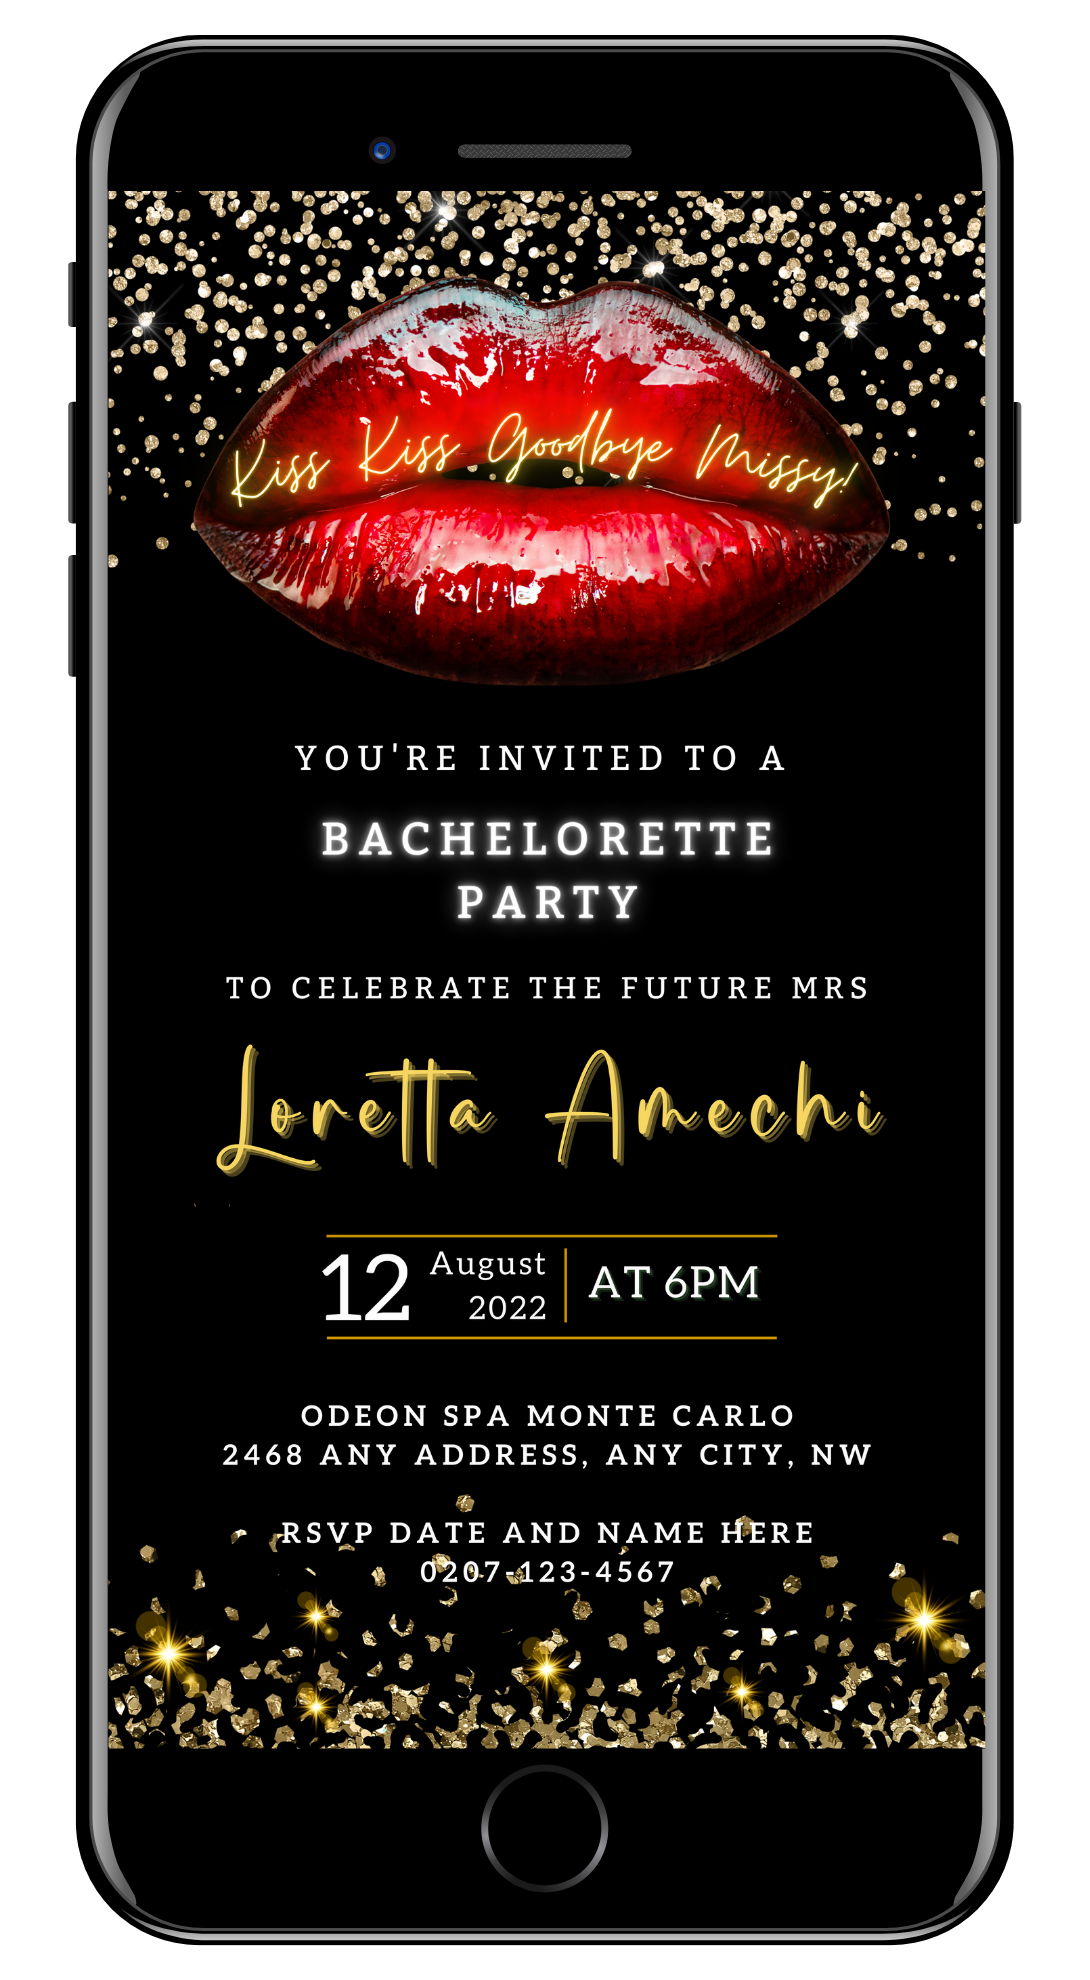 Hot Red Lips Gold Glitter Bachelorette Party Evite, displayed on a smartphone screen, featuring customizable text and design elements.